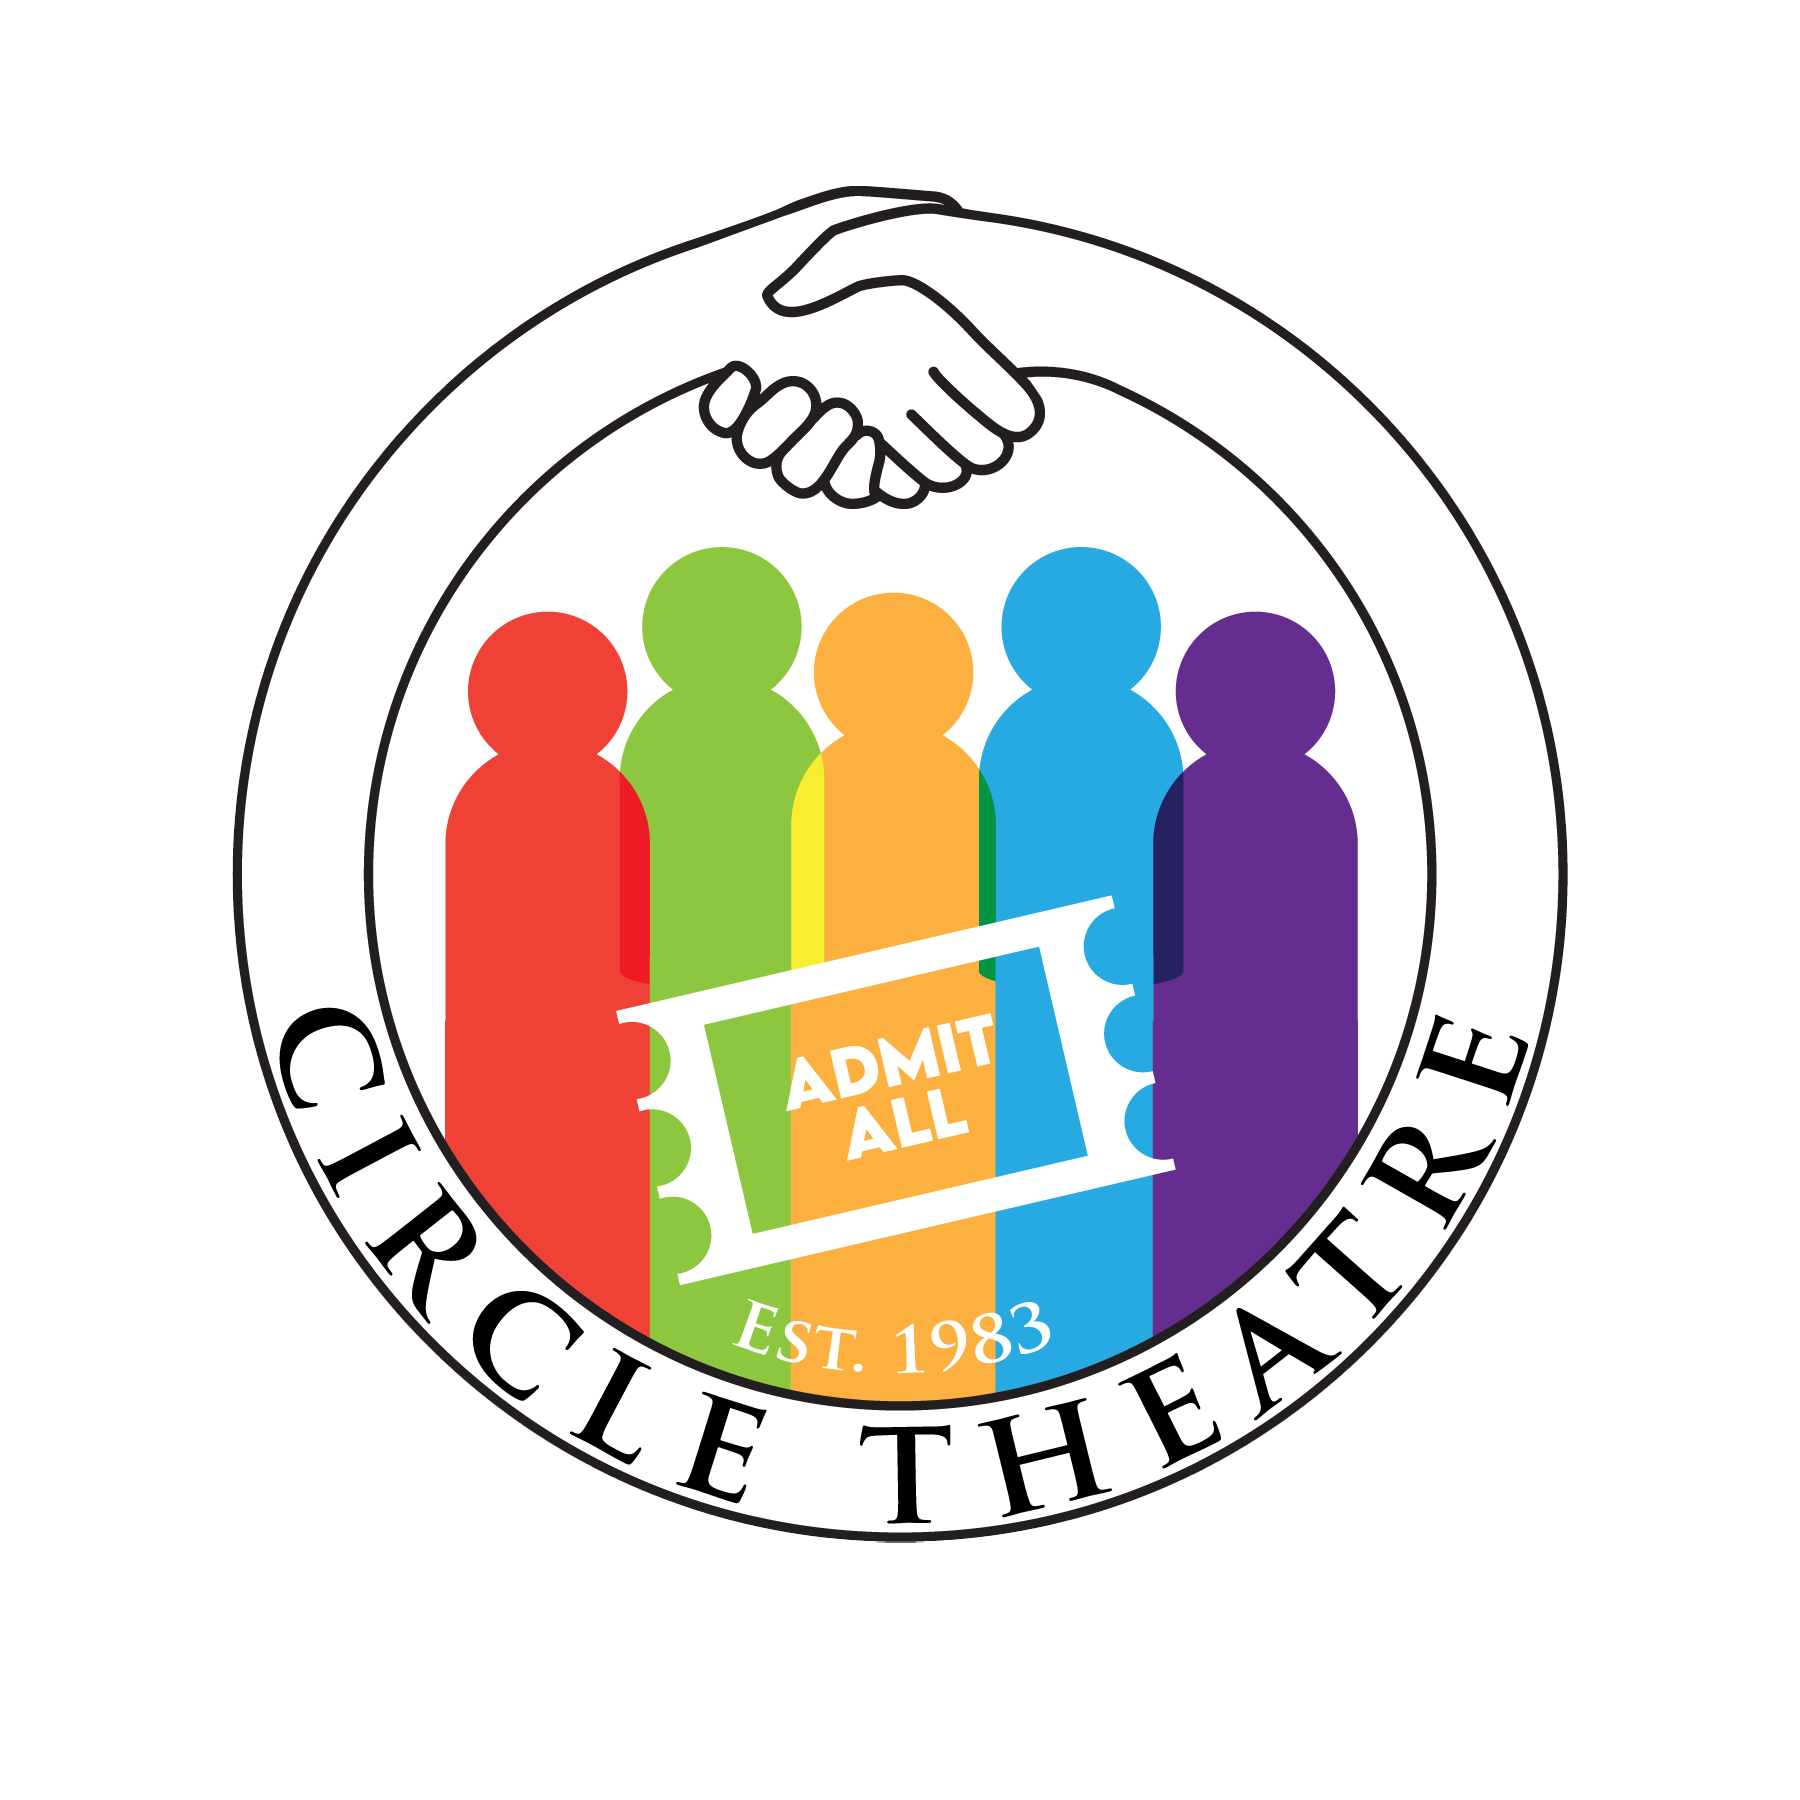 Our logo includes a circle embracing 5 individuals. Each individual is a different color of the rainbow: red, green, yellow, blue, and purple. A theater ticket is in the center of our logo and it states: "Admit All."